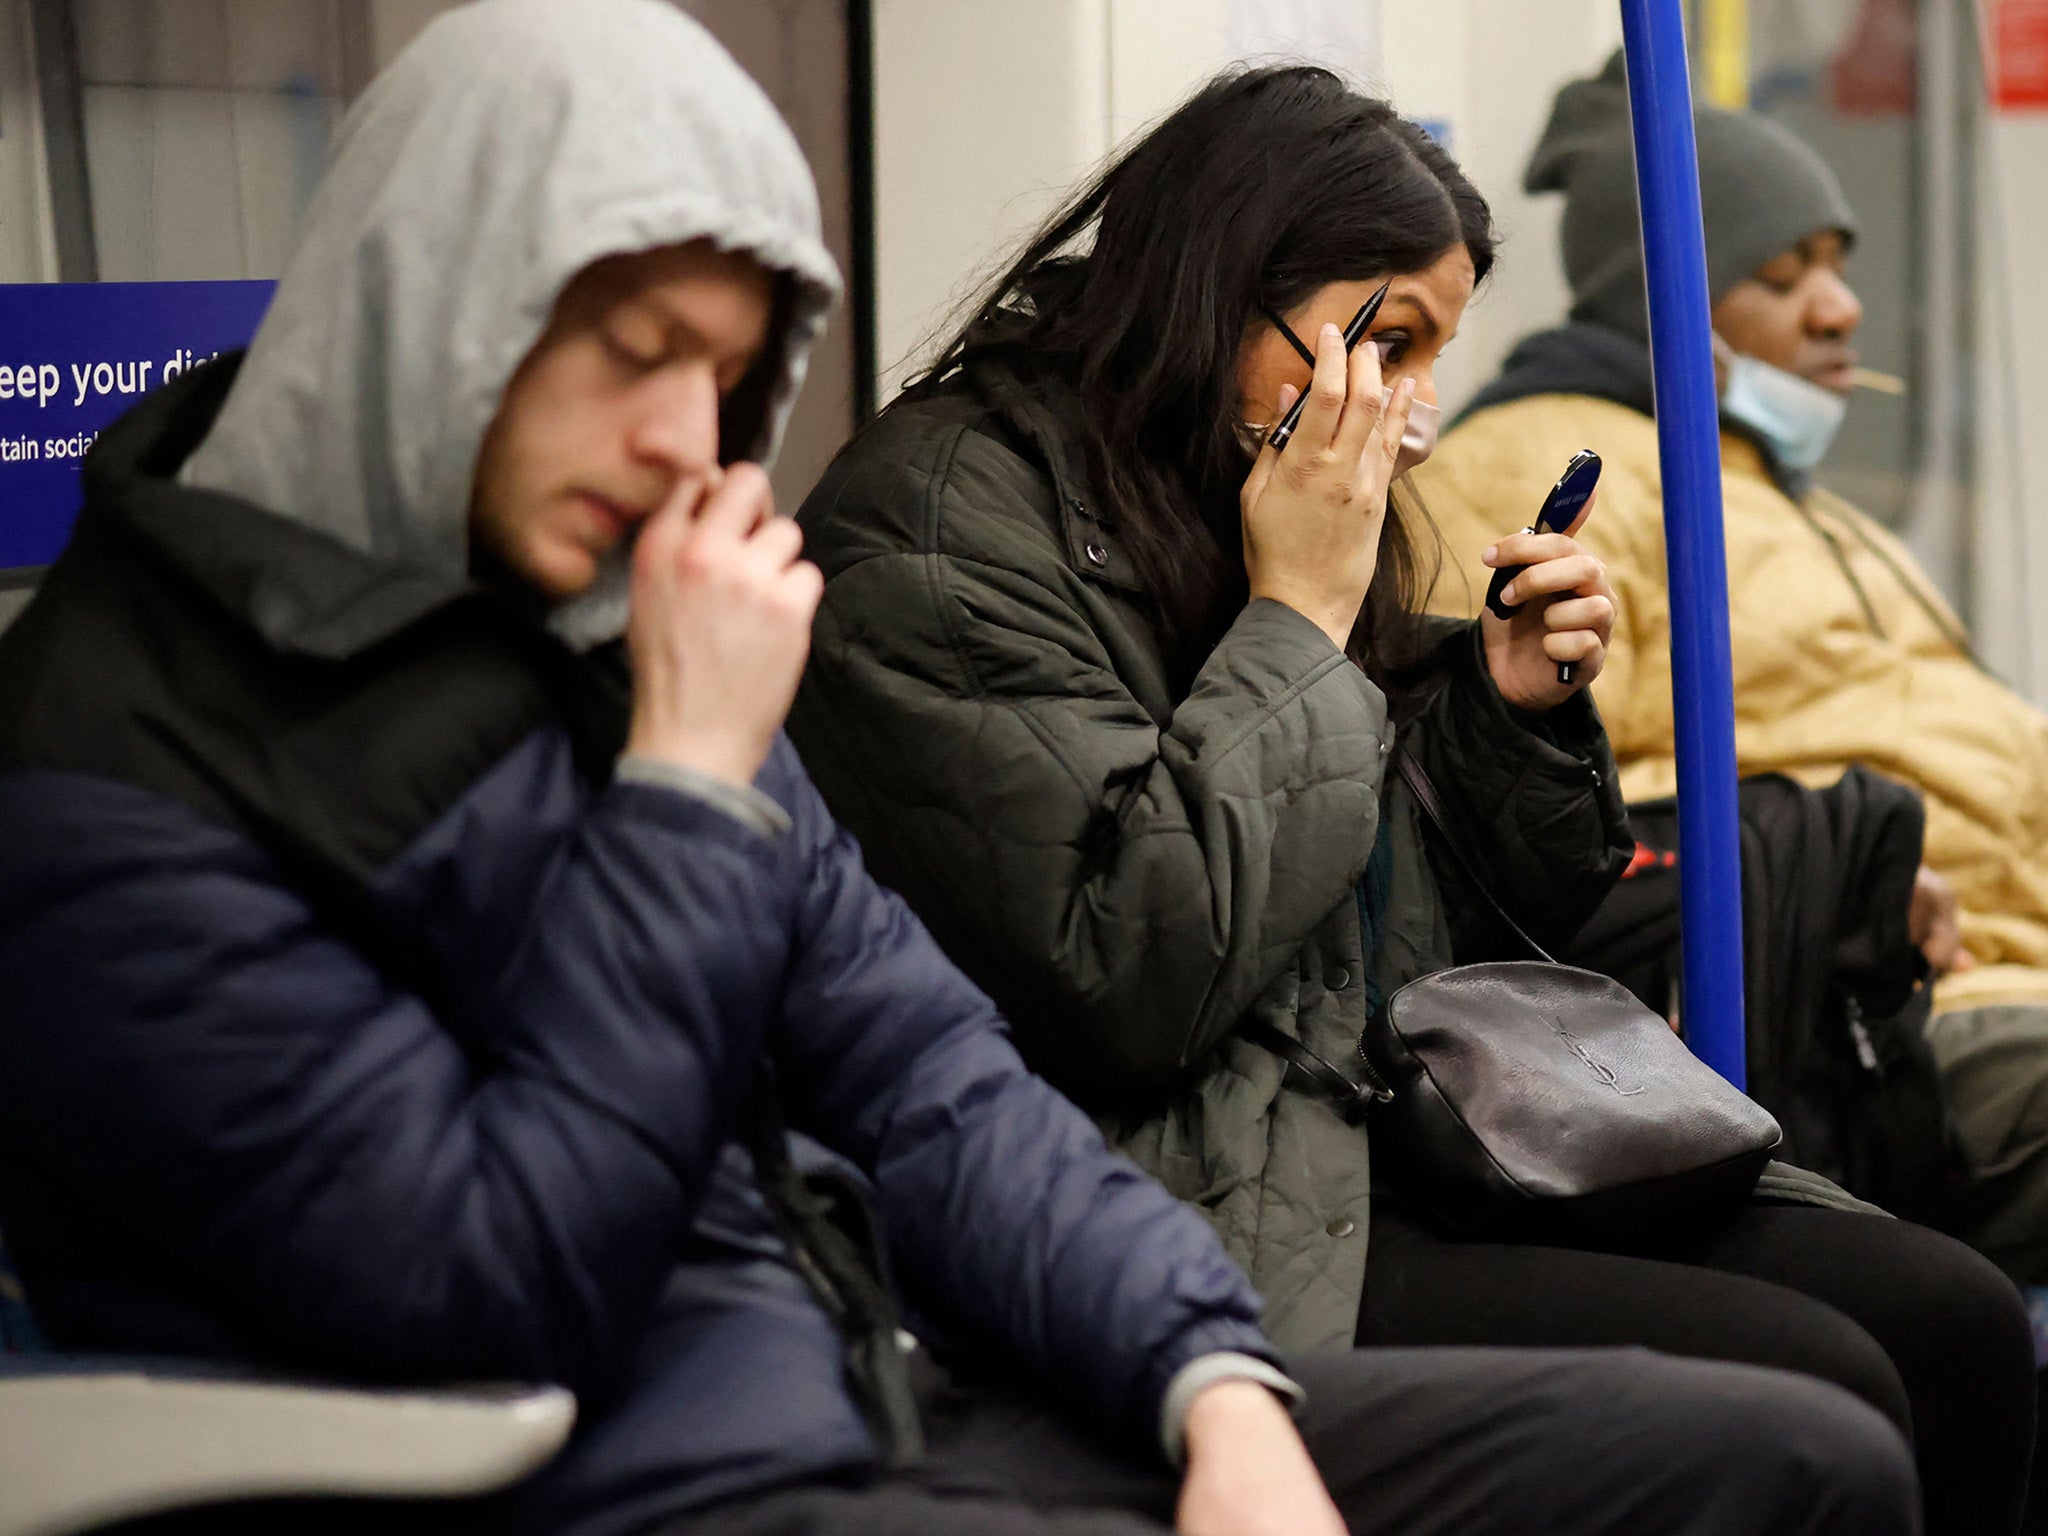 Some local authorities have kept mask rules in place on public transport